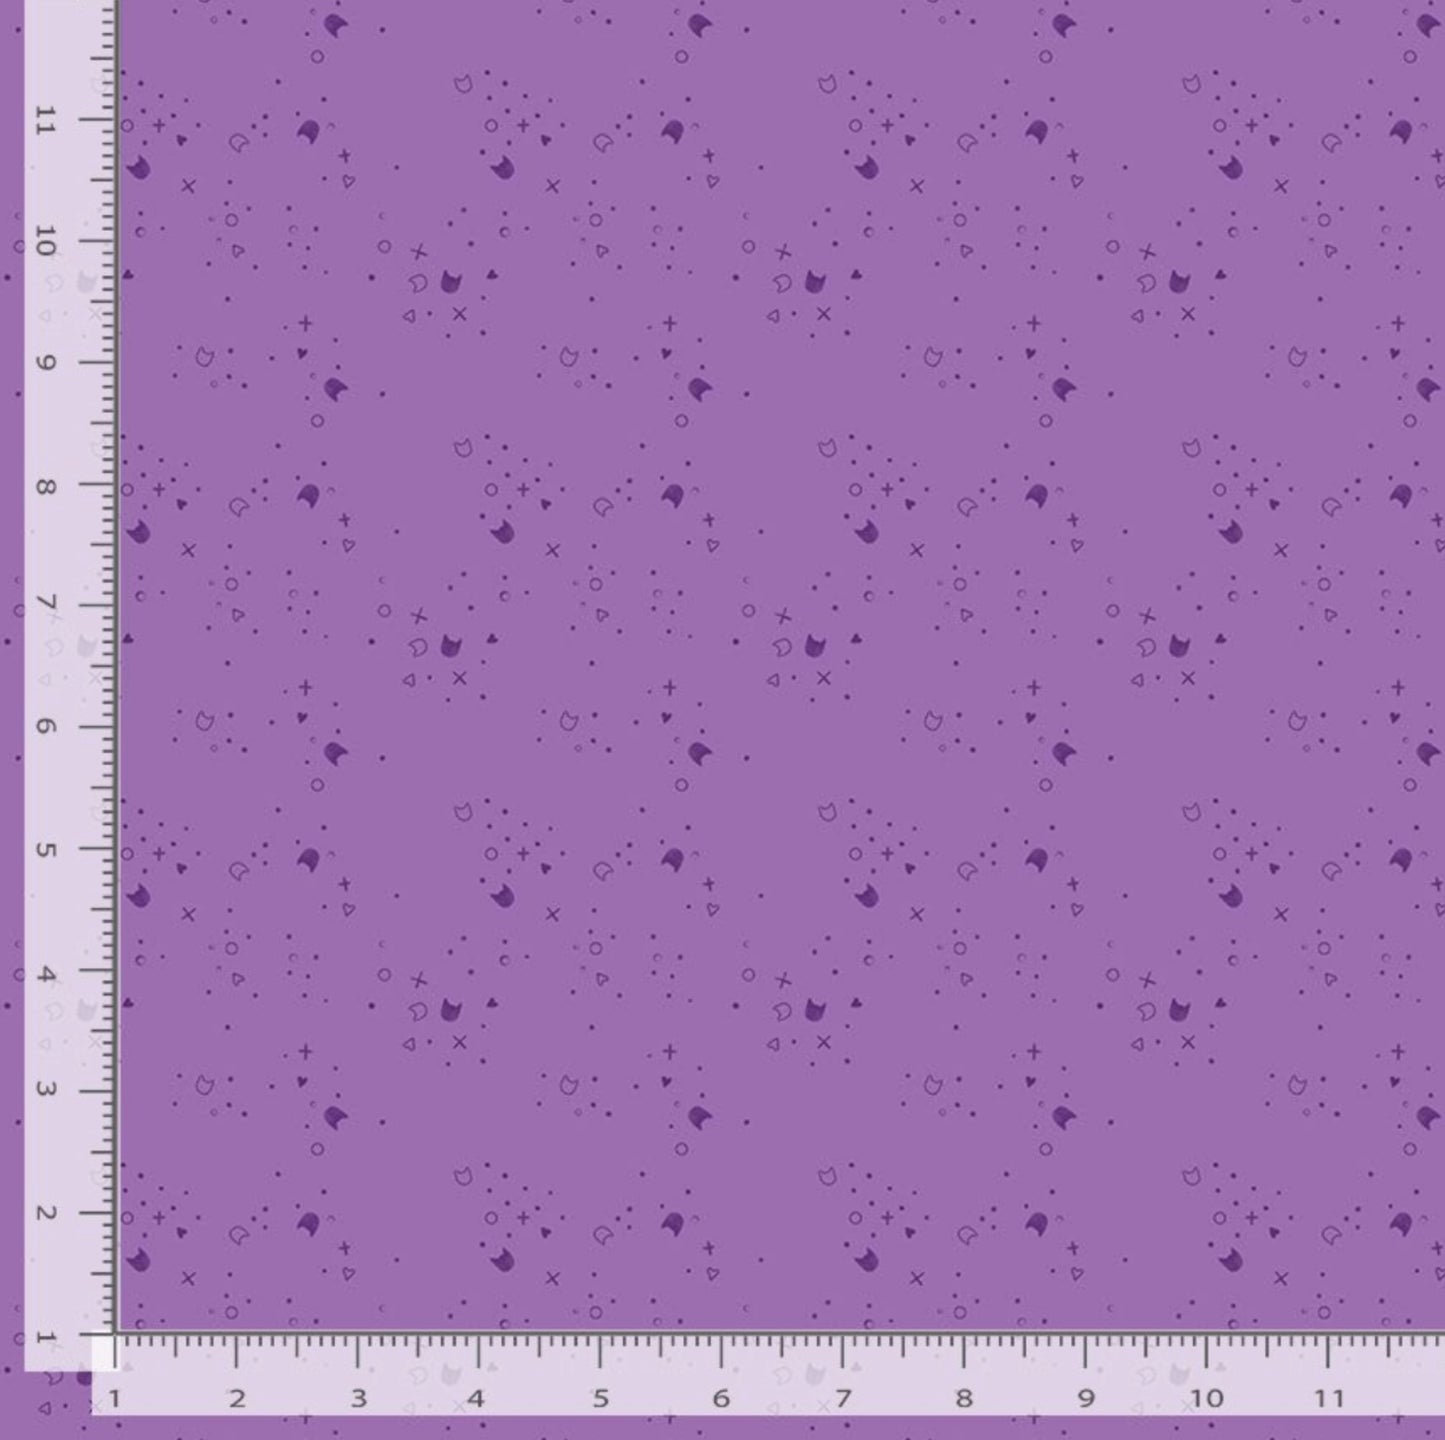 Thistle Kitty Litter Fabric Blender from the Kitty Litter Fabric Collection by Dear Stella Fabrics